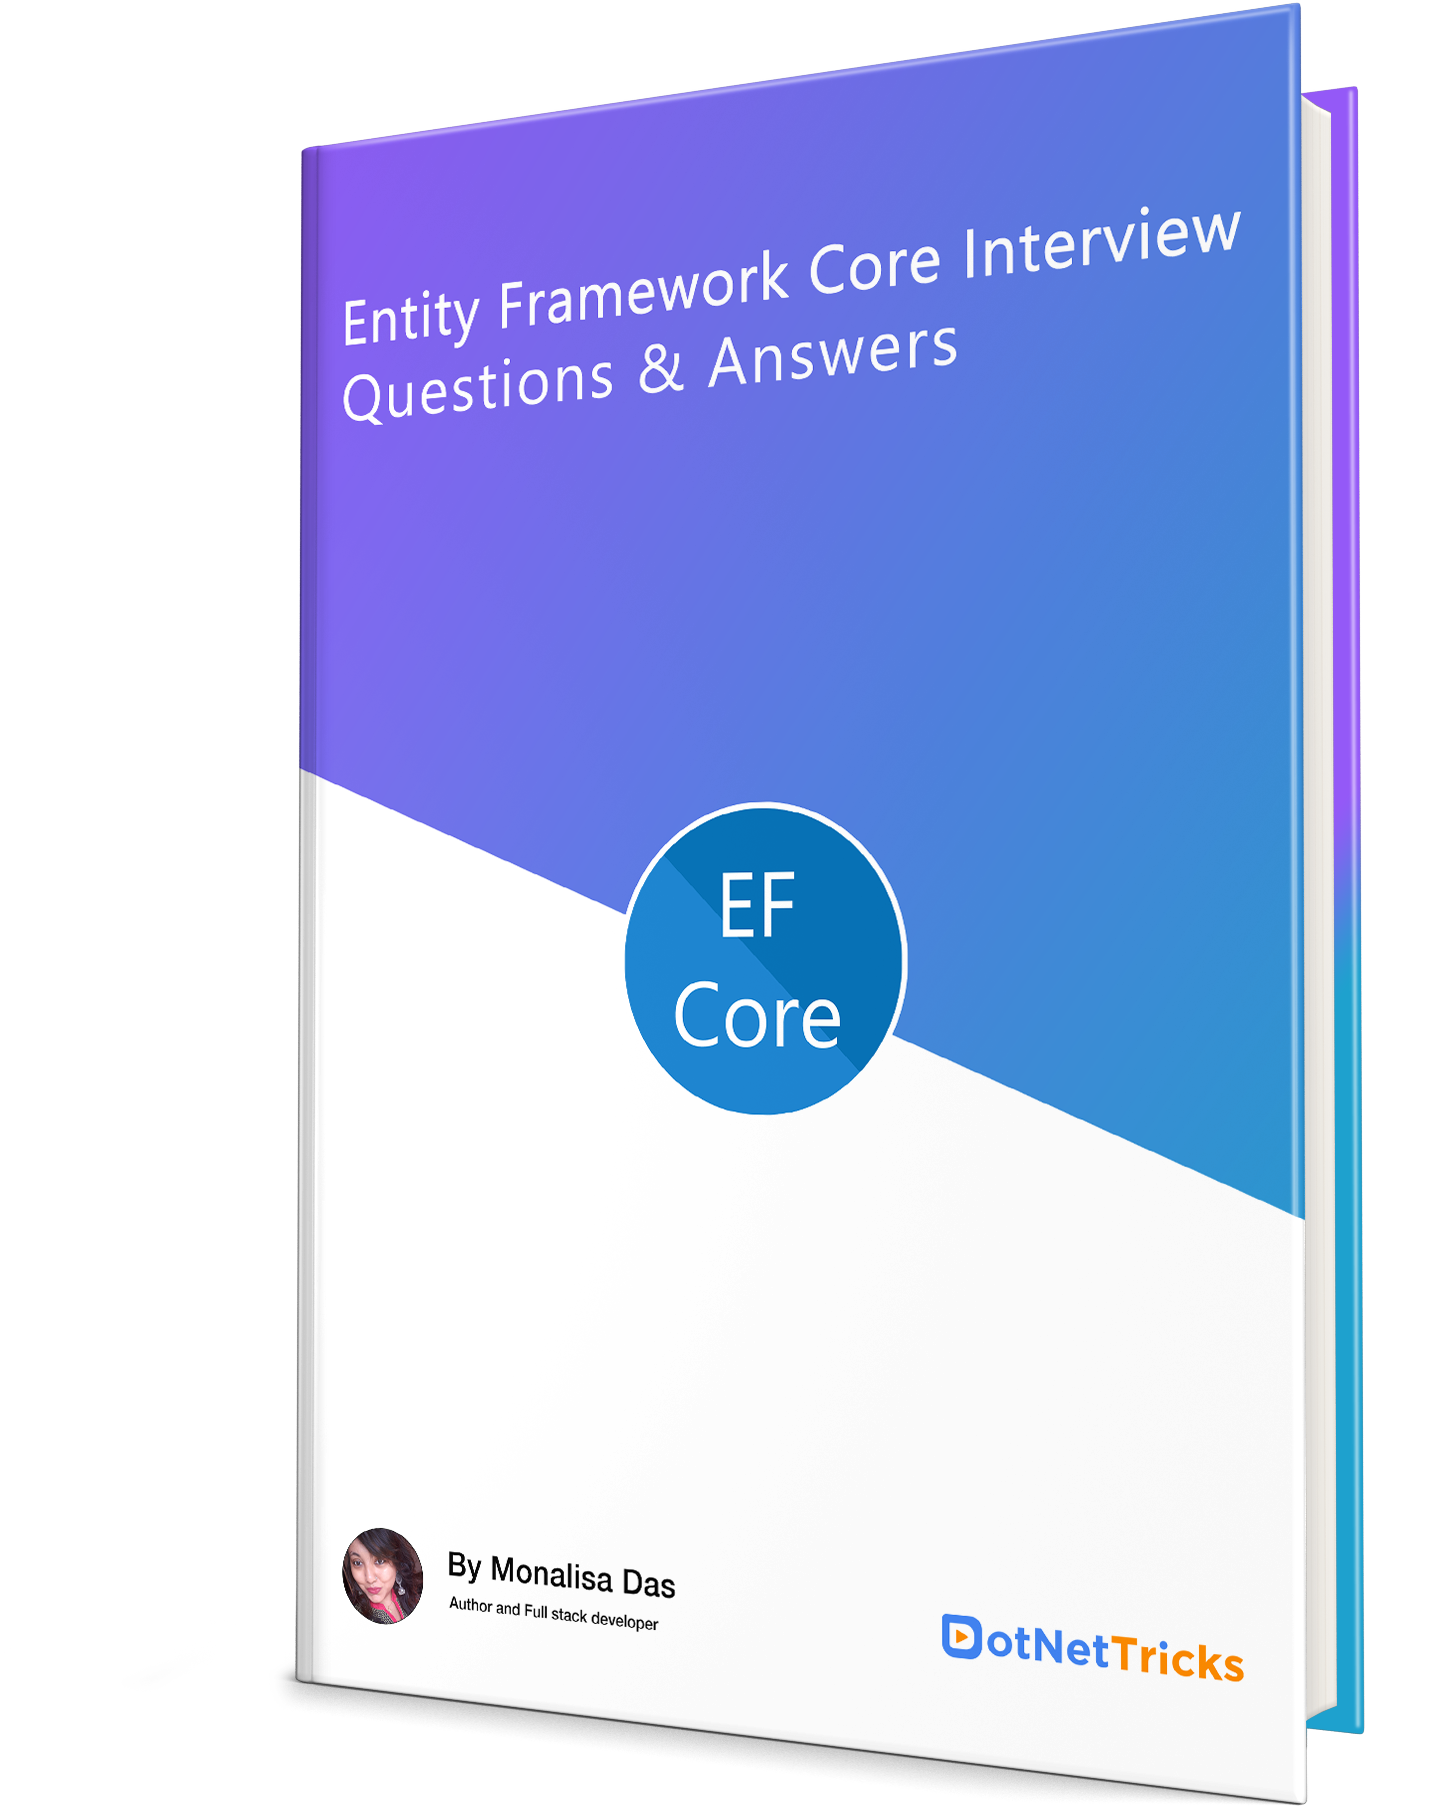 Entity Framework Core Questions and Answers